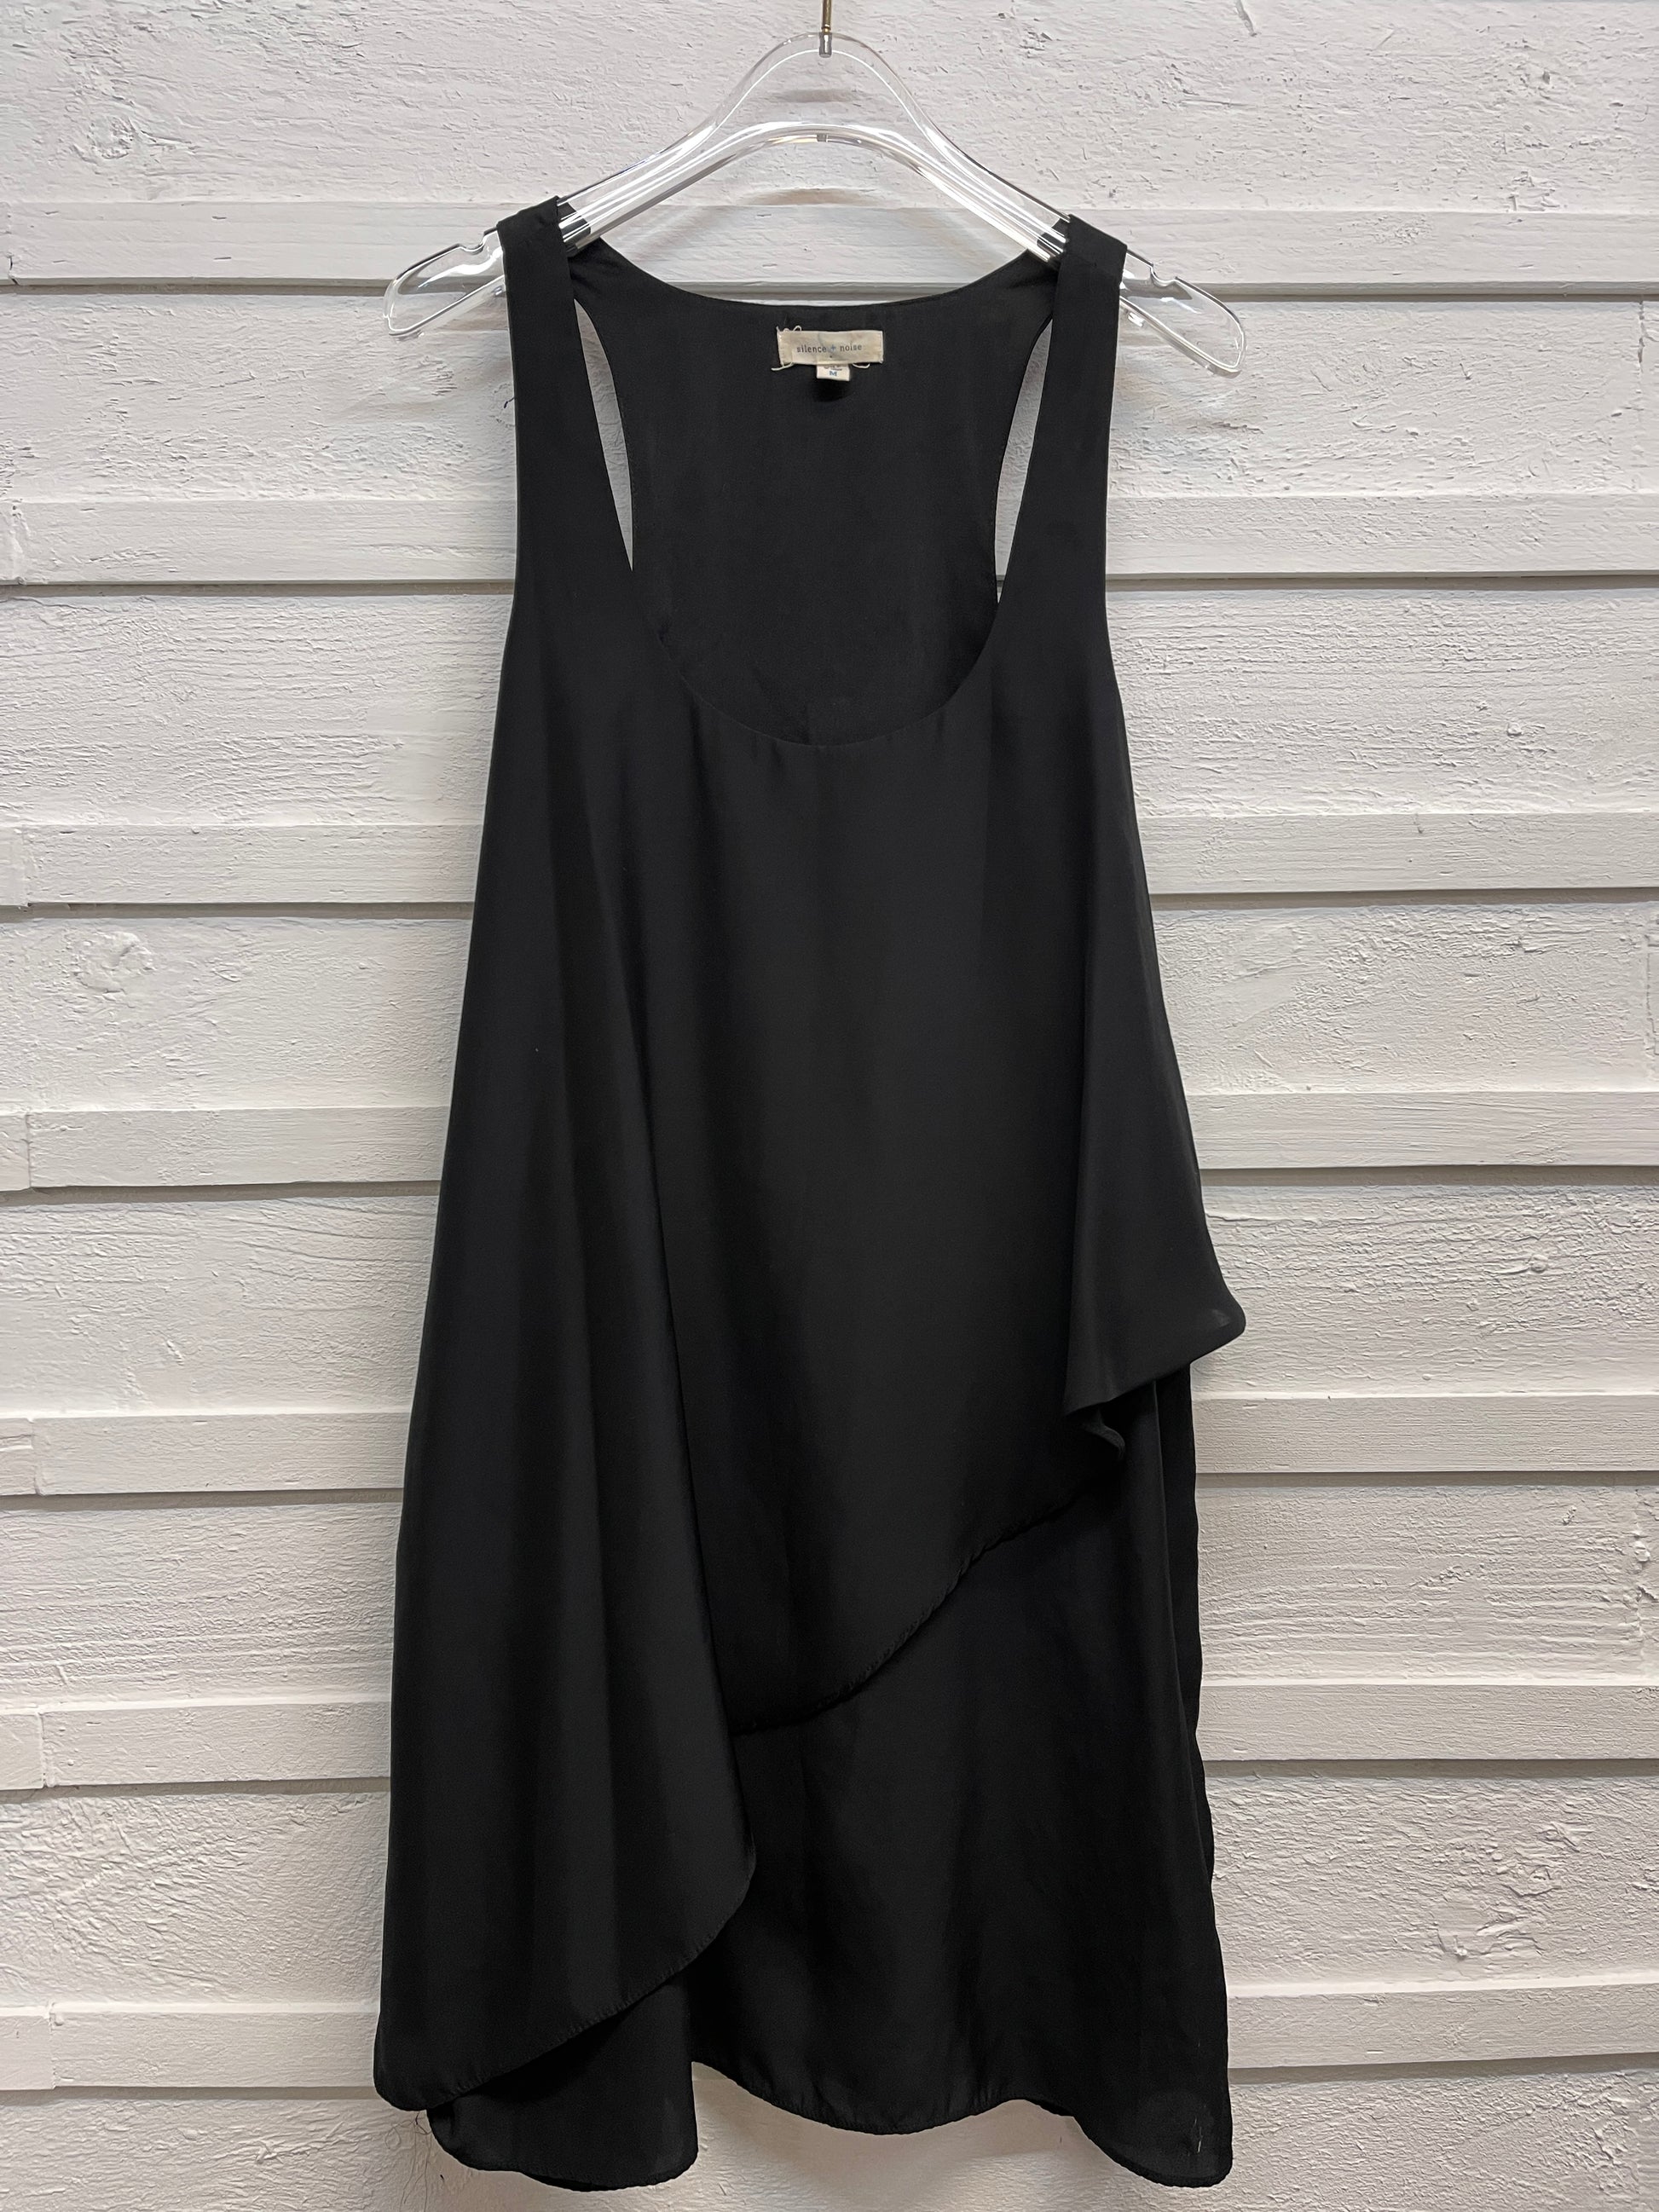 Silence & Noise Little Black Dress-Urban Outfitters